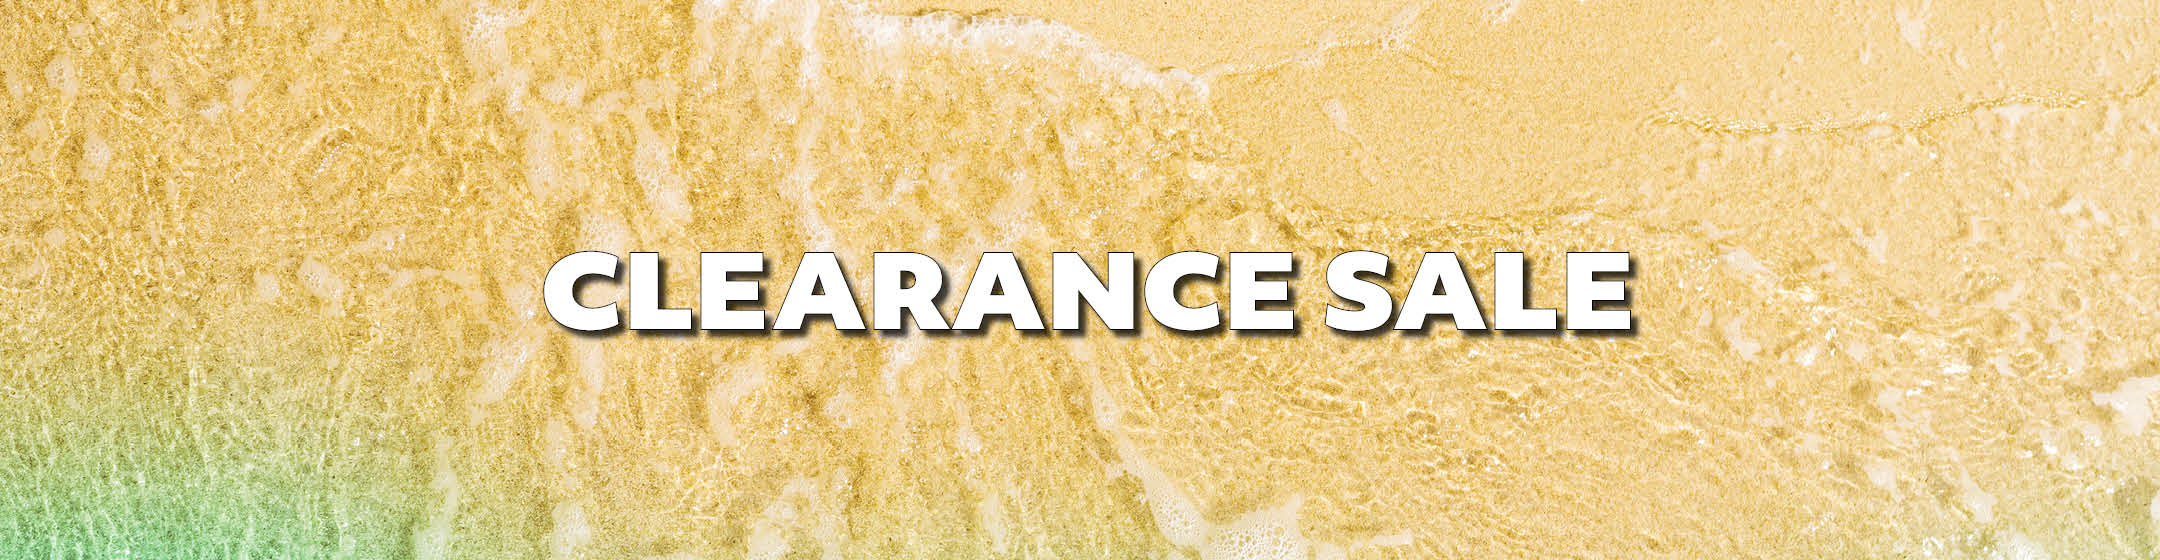 Clearance Sale - Check it our now for upto 55% off